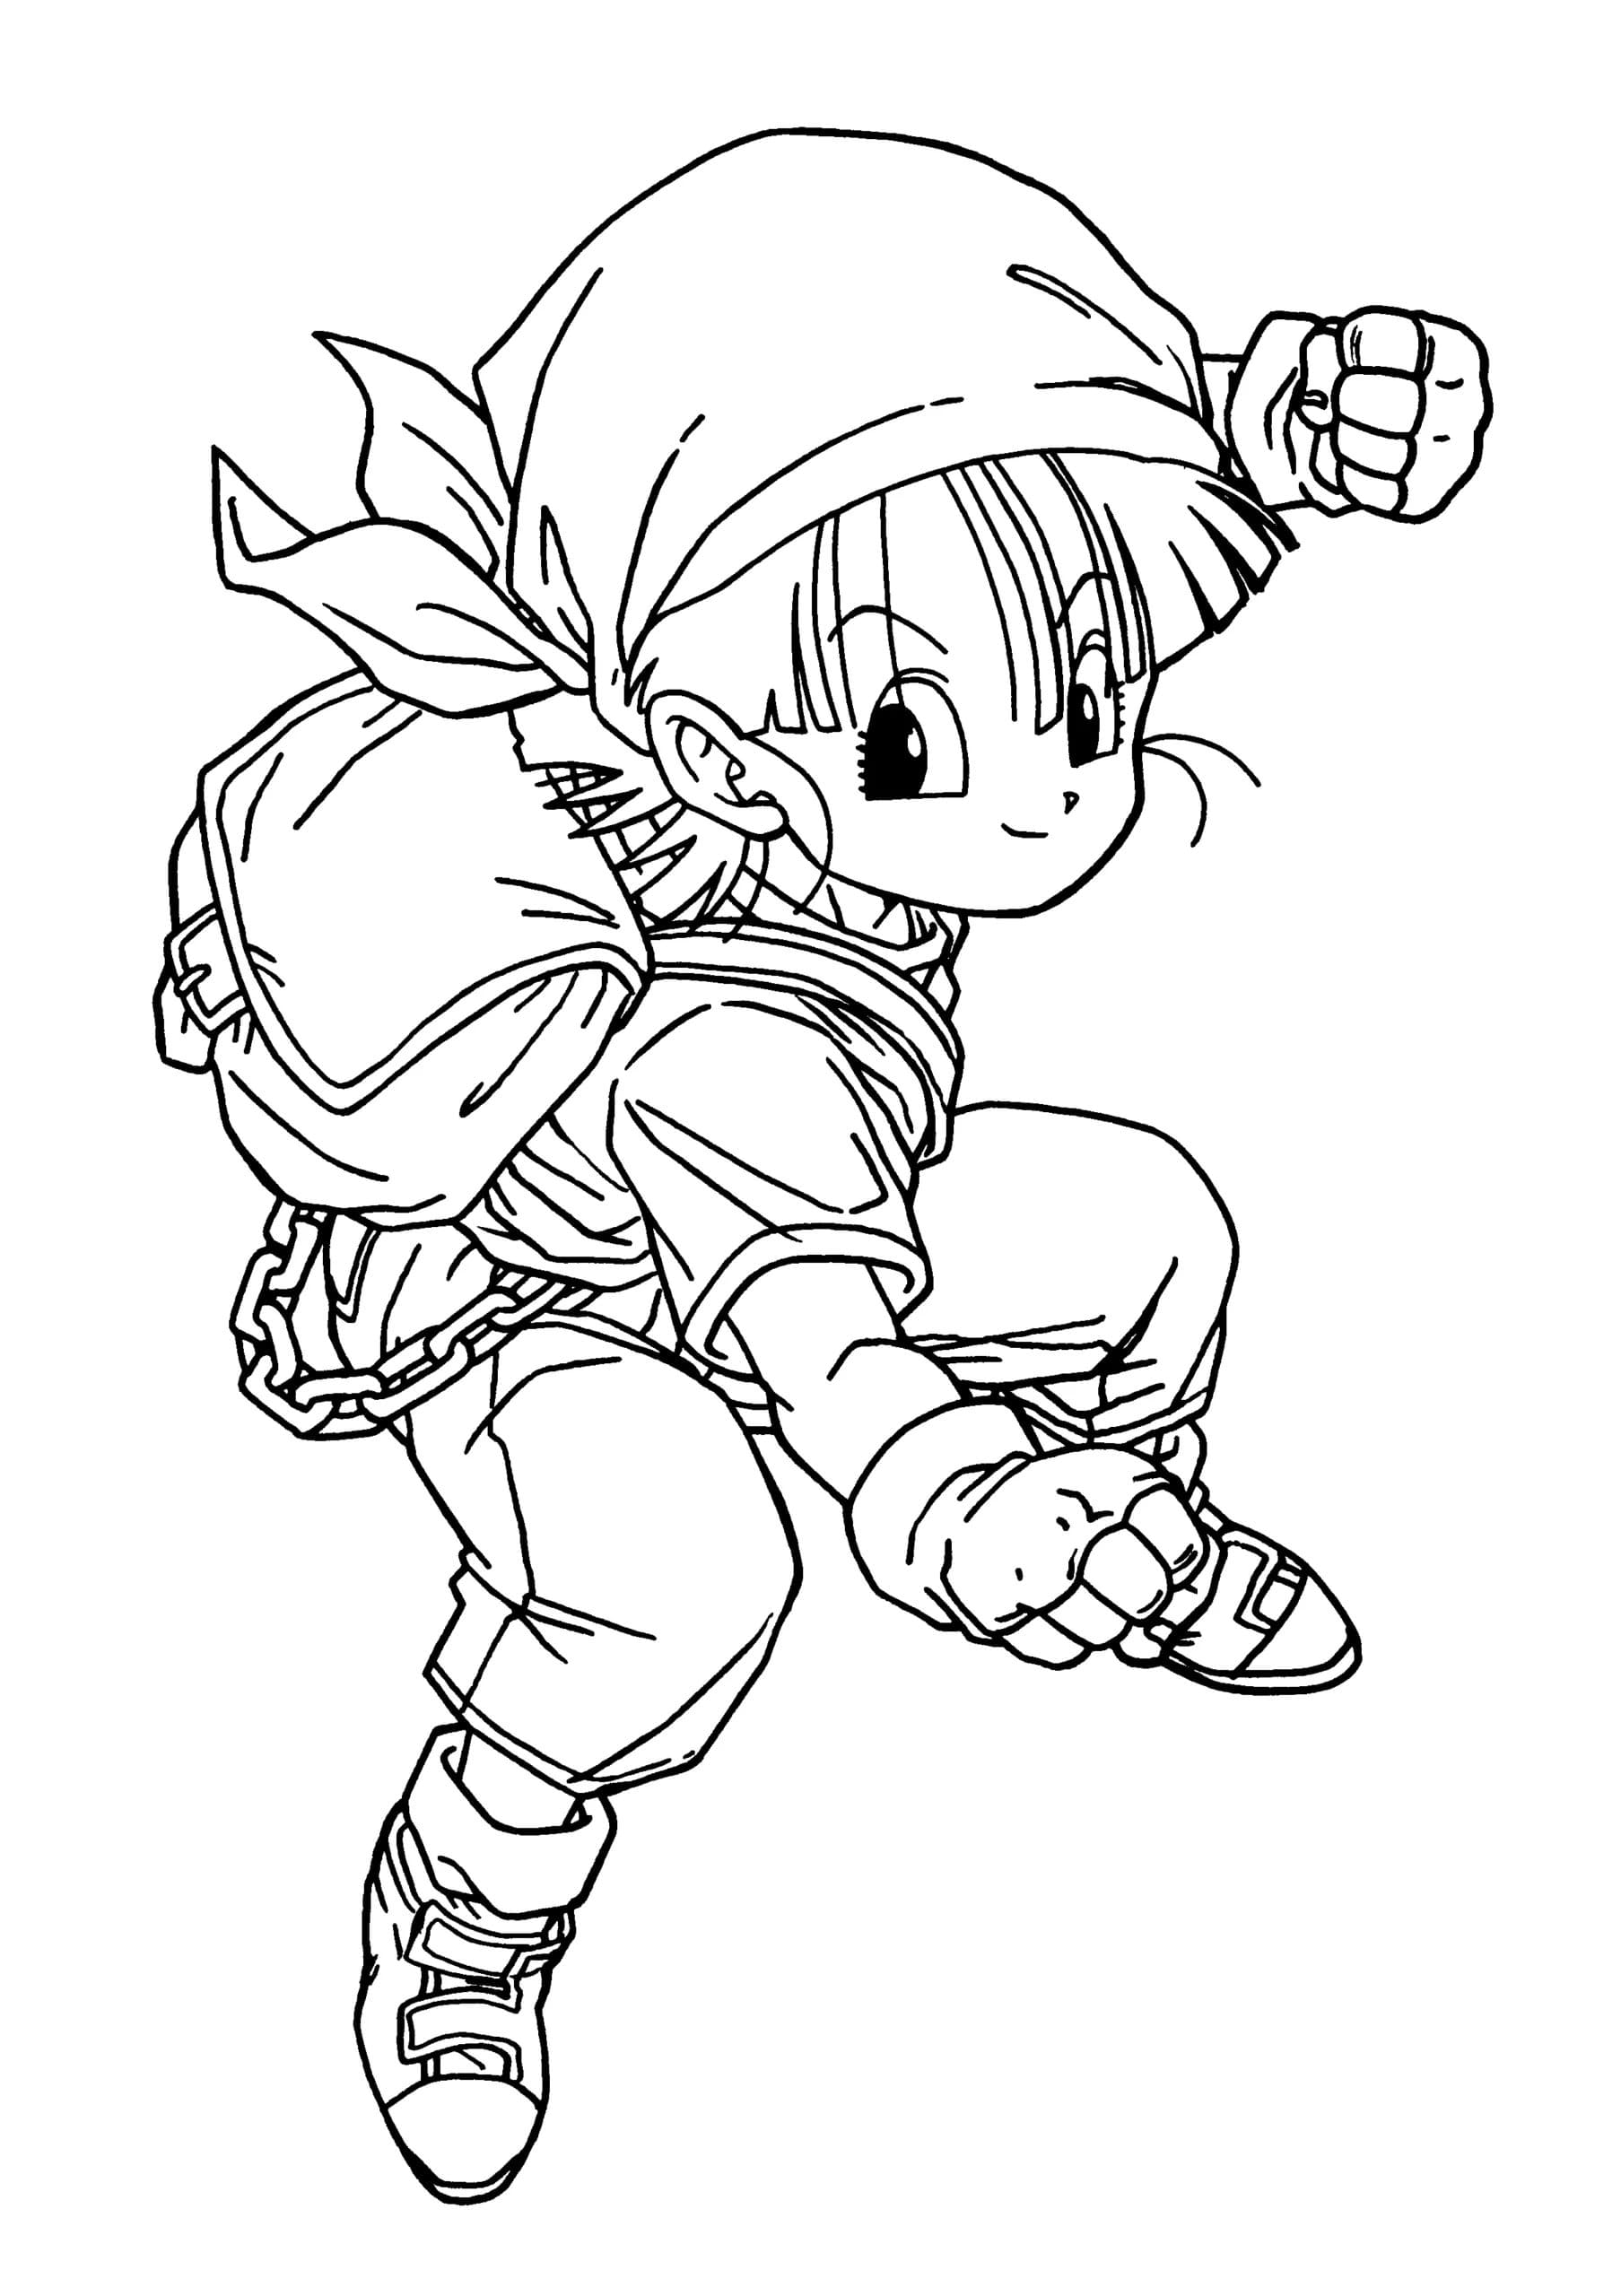 Coloring page Dragon Ball The girl from the anime Dragon Ball